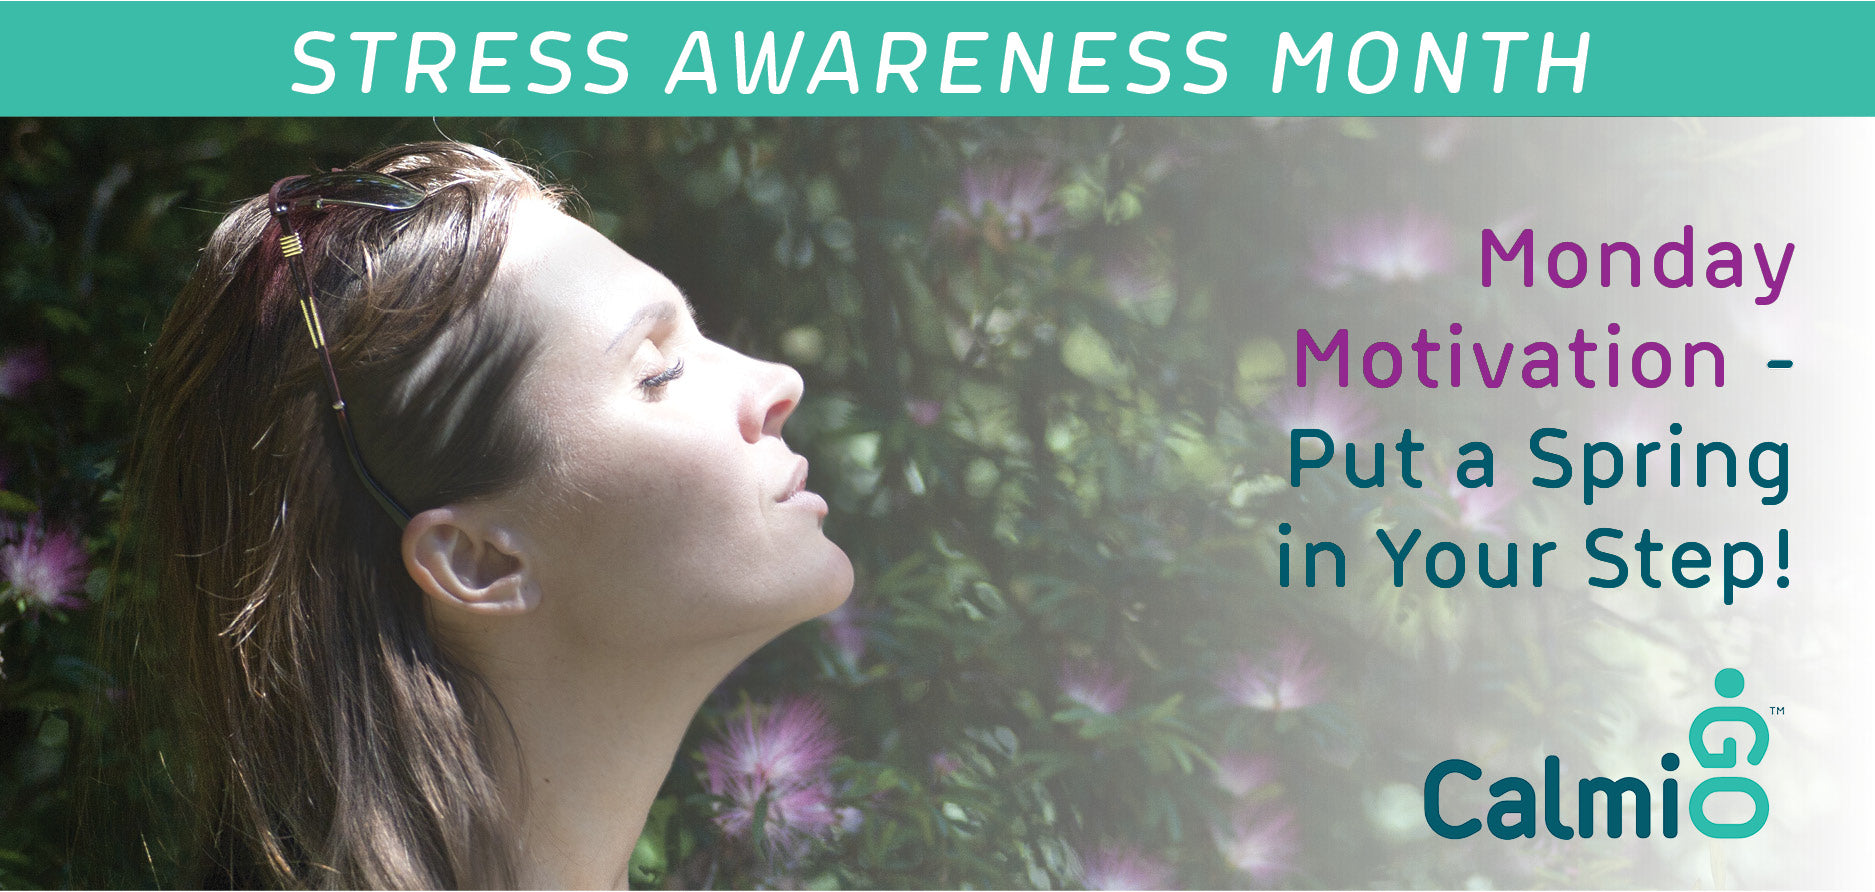 April 1 – Stress Awareness Month Monday Motivation – Put a Spring in Your Step!